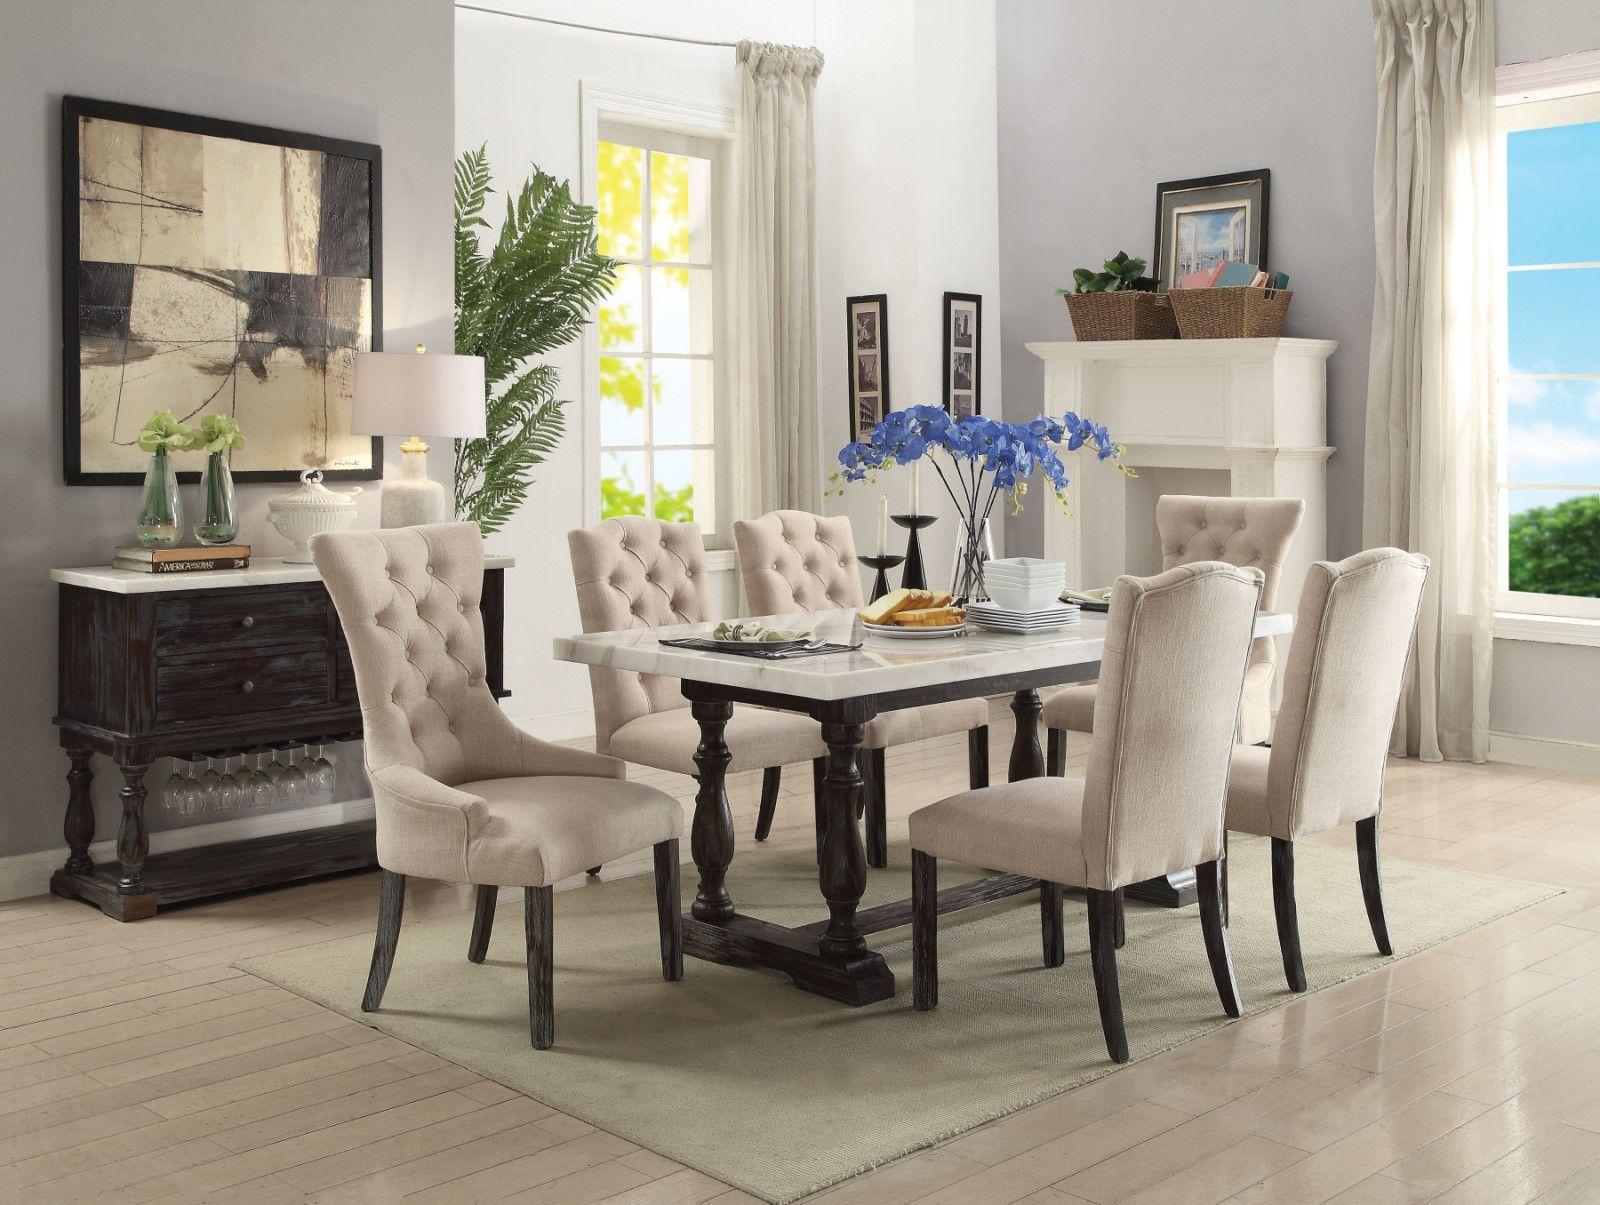 

    
Rustic White Marble & Espresso Dining Table Set & Chairs by Acme Gerardo 60820-7pcs
